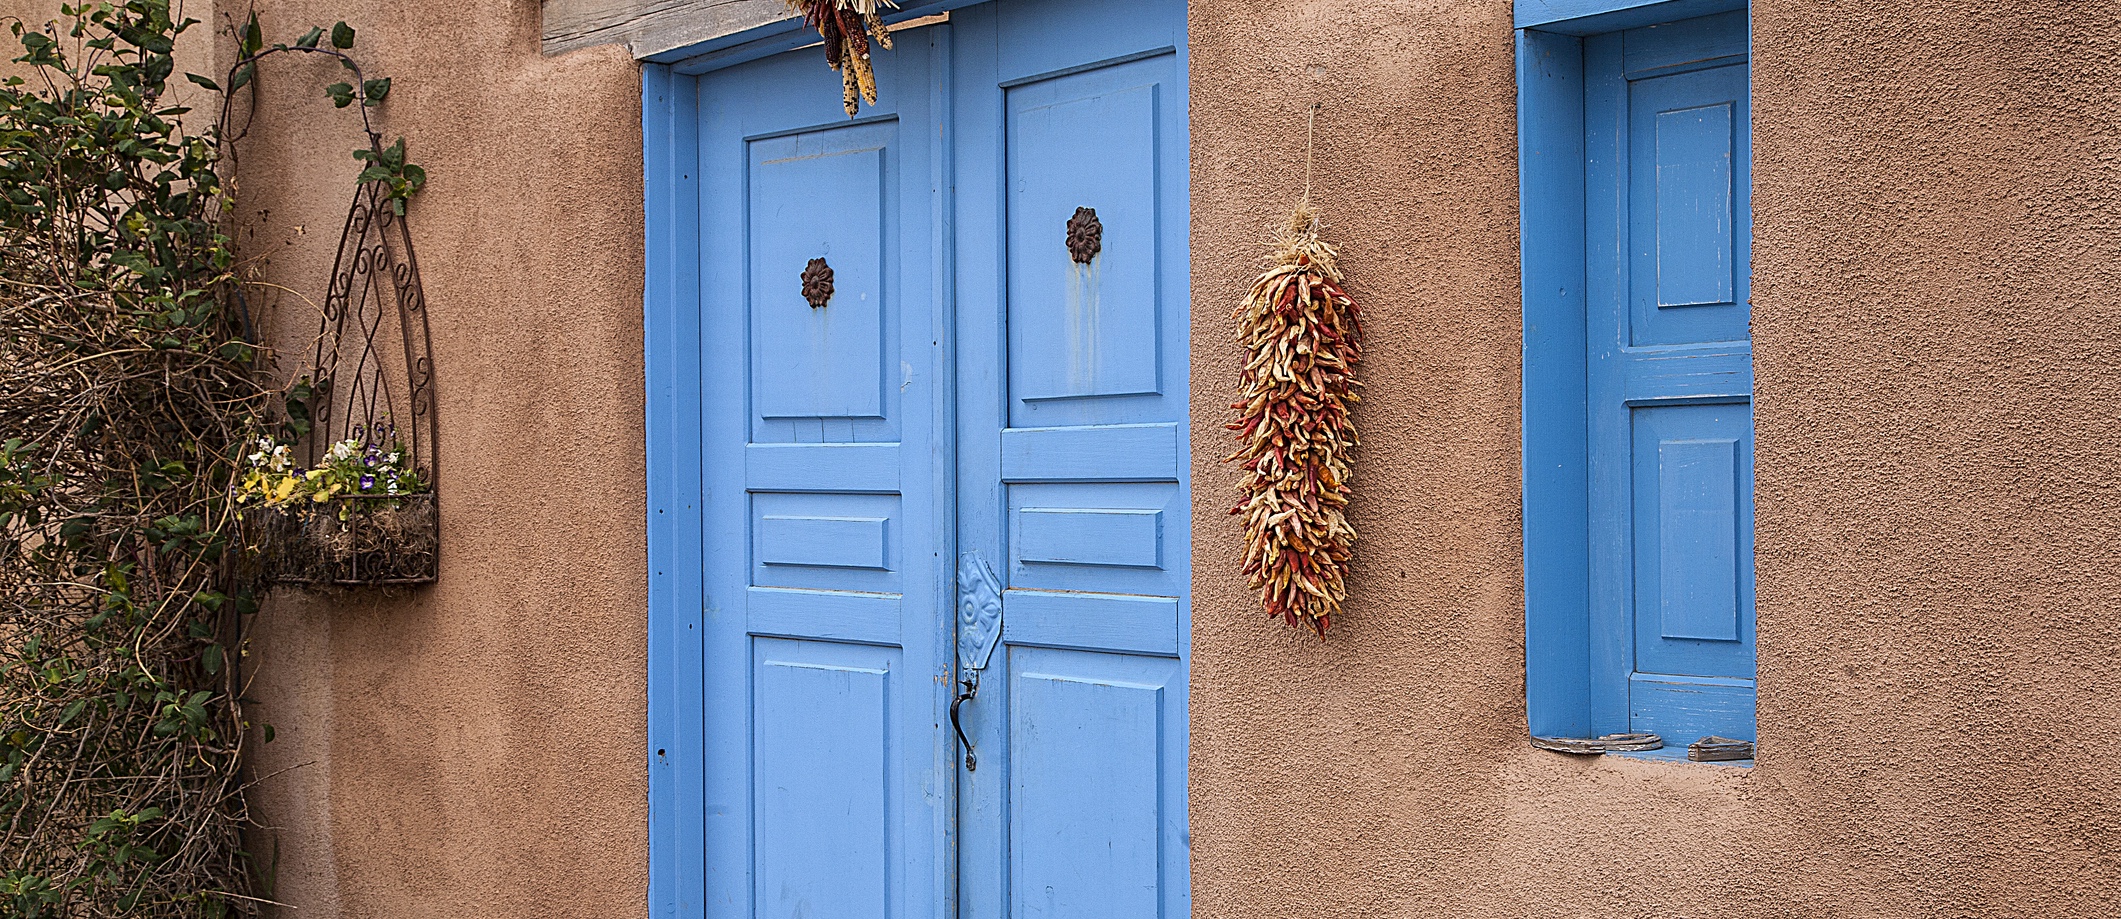 Blue doors of an old adobe house in Taos, New Mexico. Hanging peppers and indian corn.